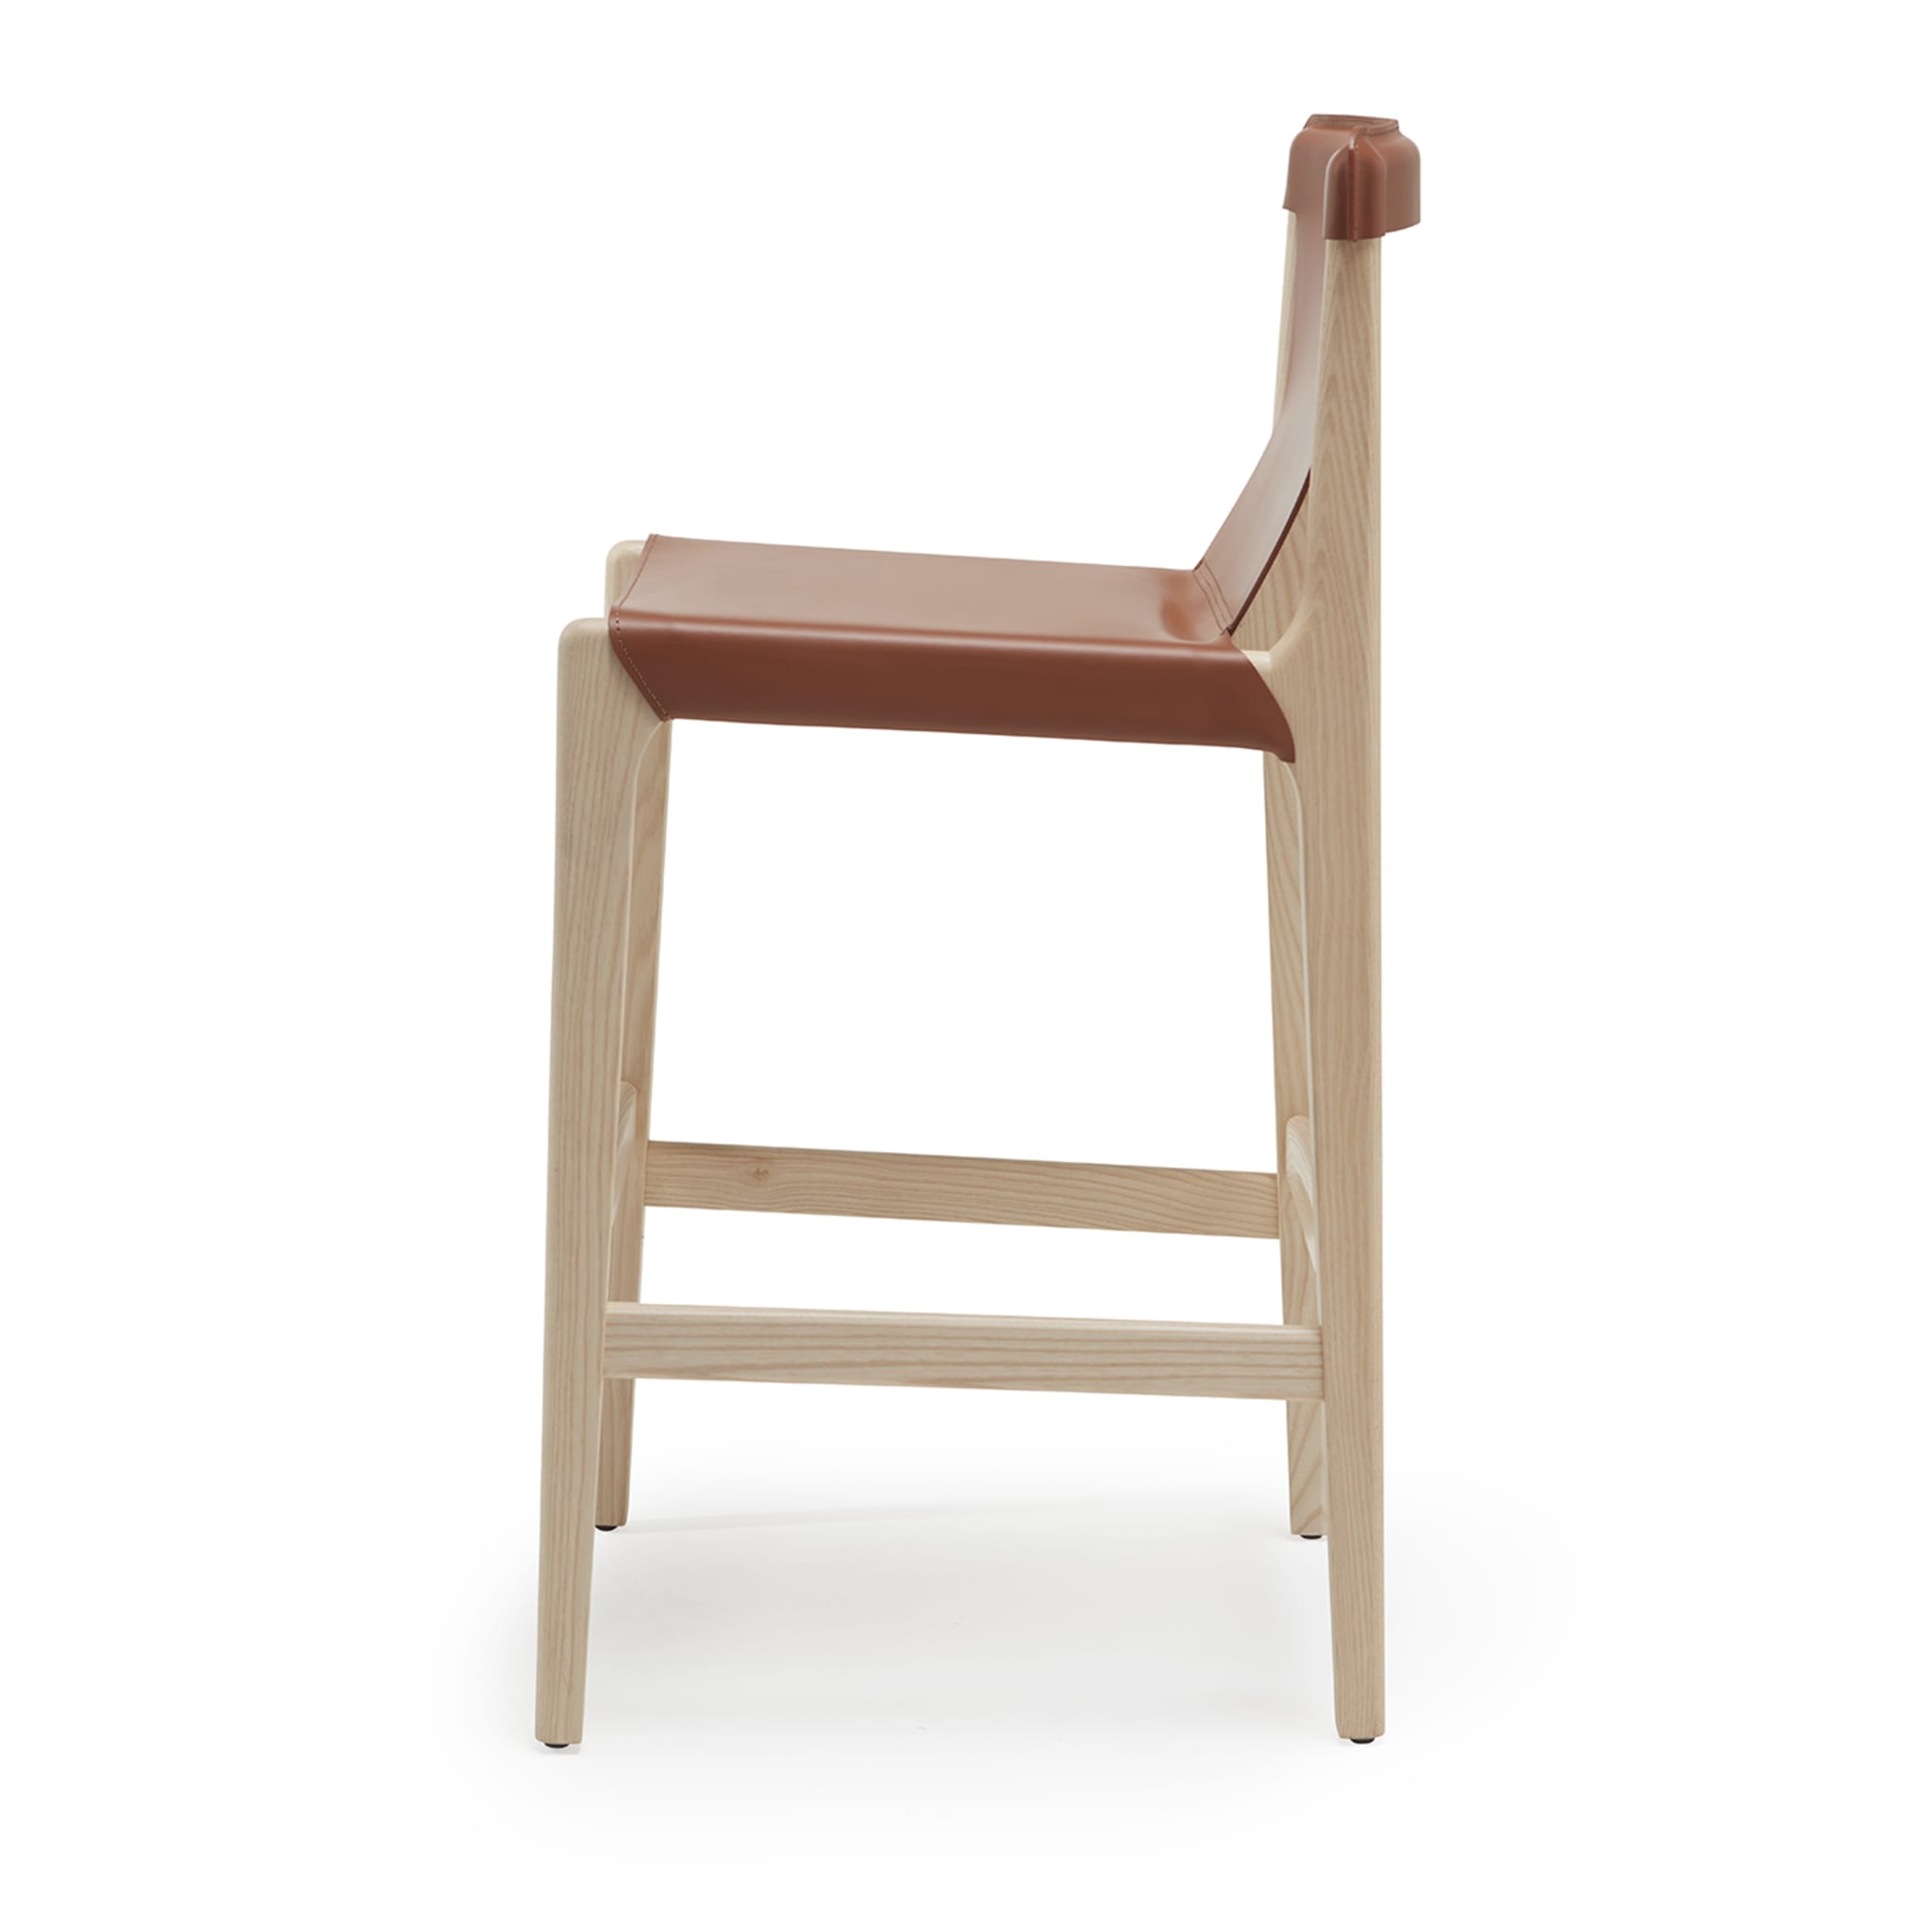 Burano/sg 30 Brown Leather Counter Stool by Balutto Associati - Alternative view 2